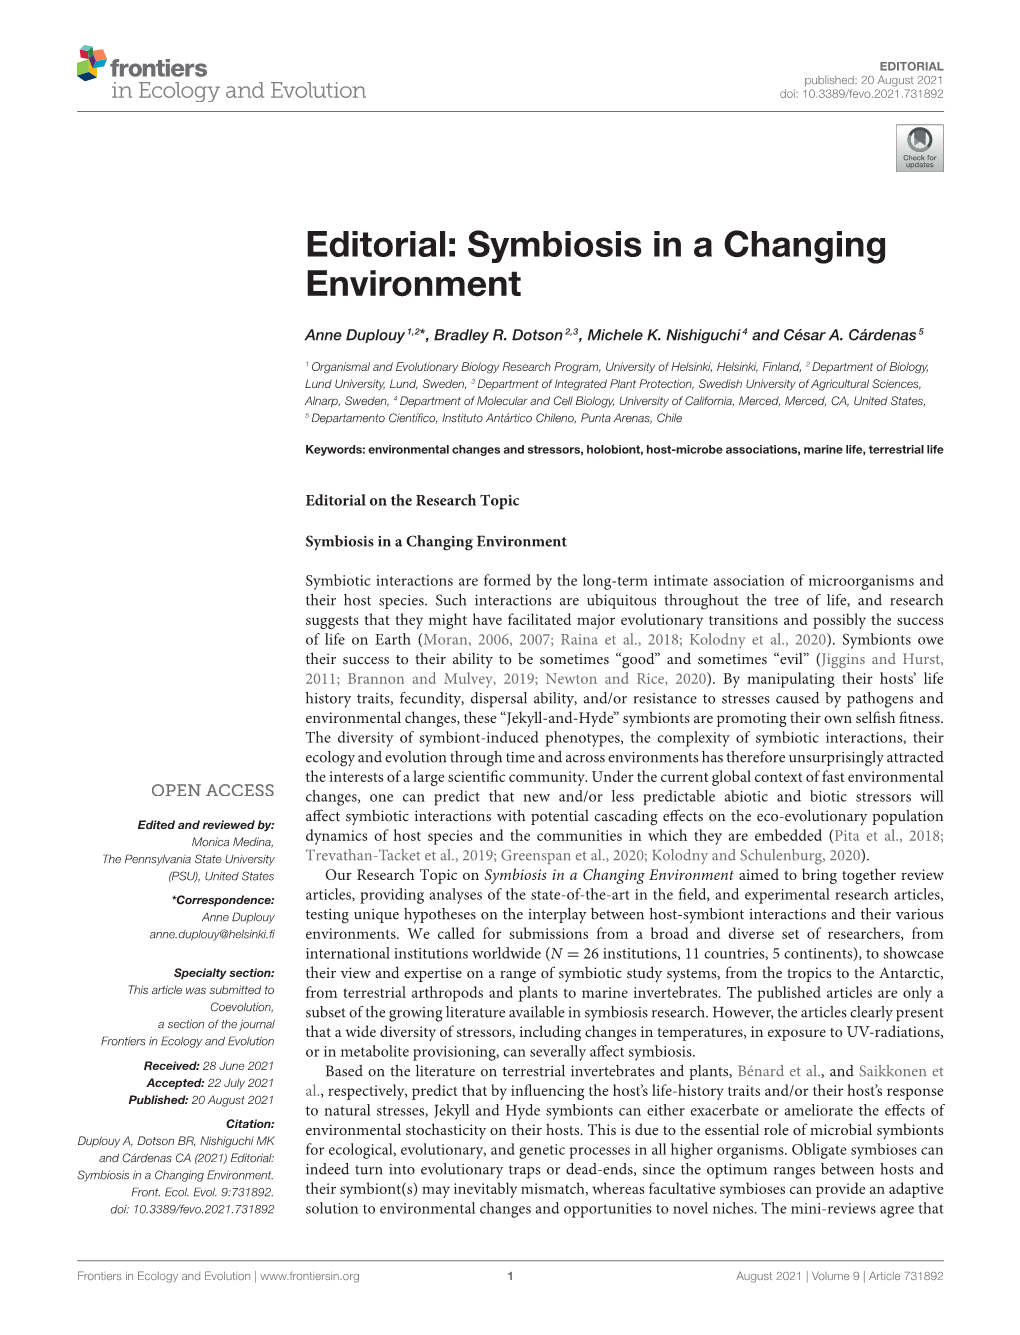 Editorial: Symbiosis in a Changing Environment